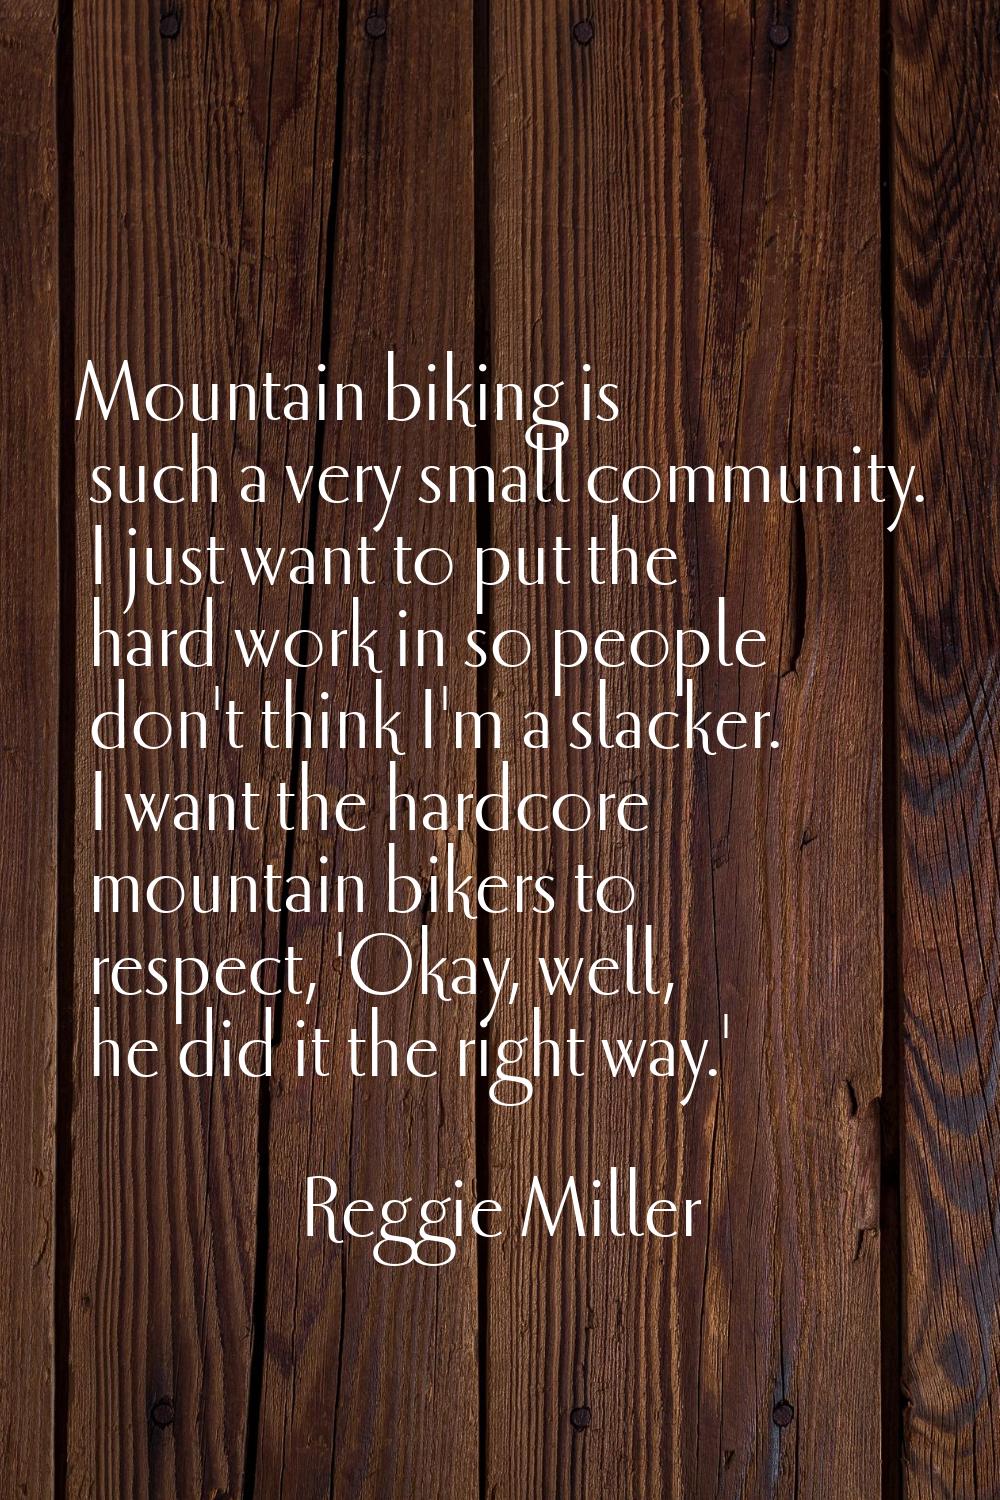 Mountain biking is such a very small community. I just want to put the hard work in so people don't